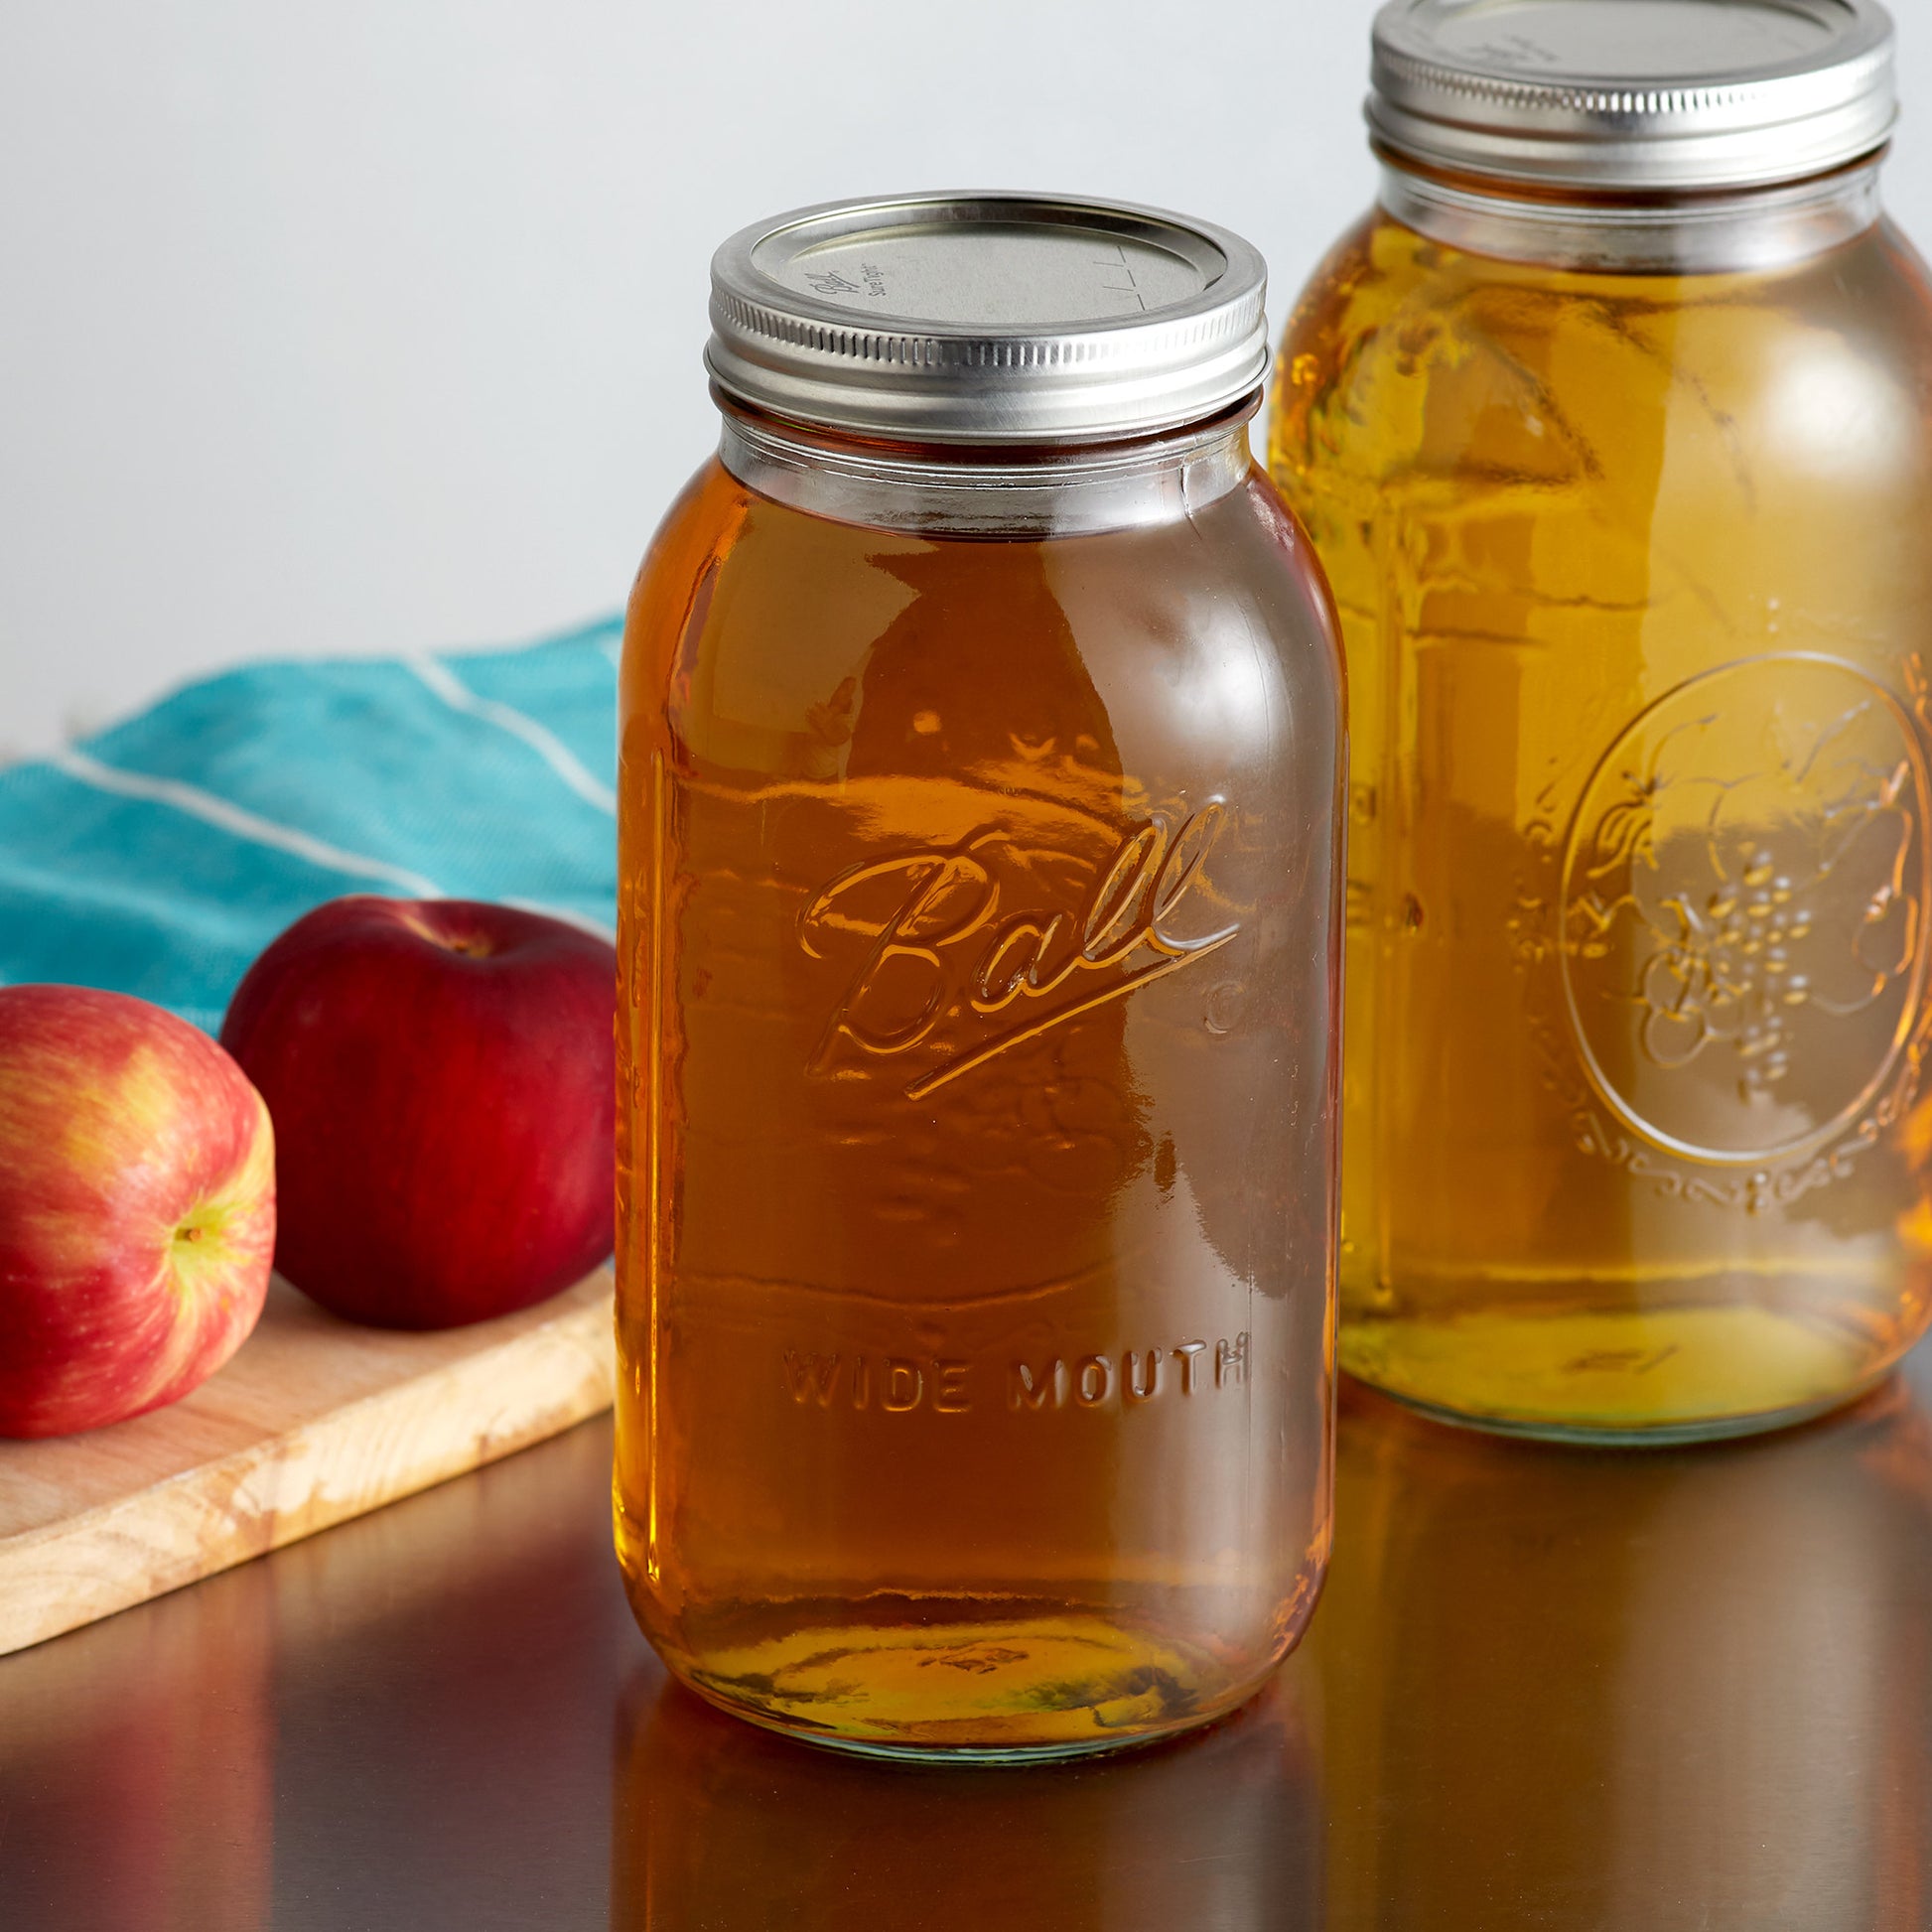 Two Ball jars containing freshly made apple cider on a countertop